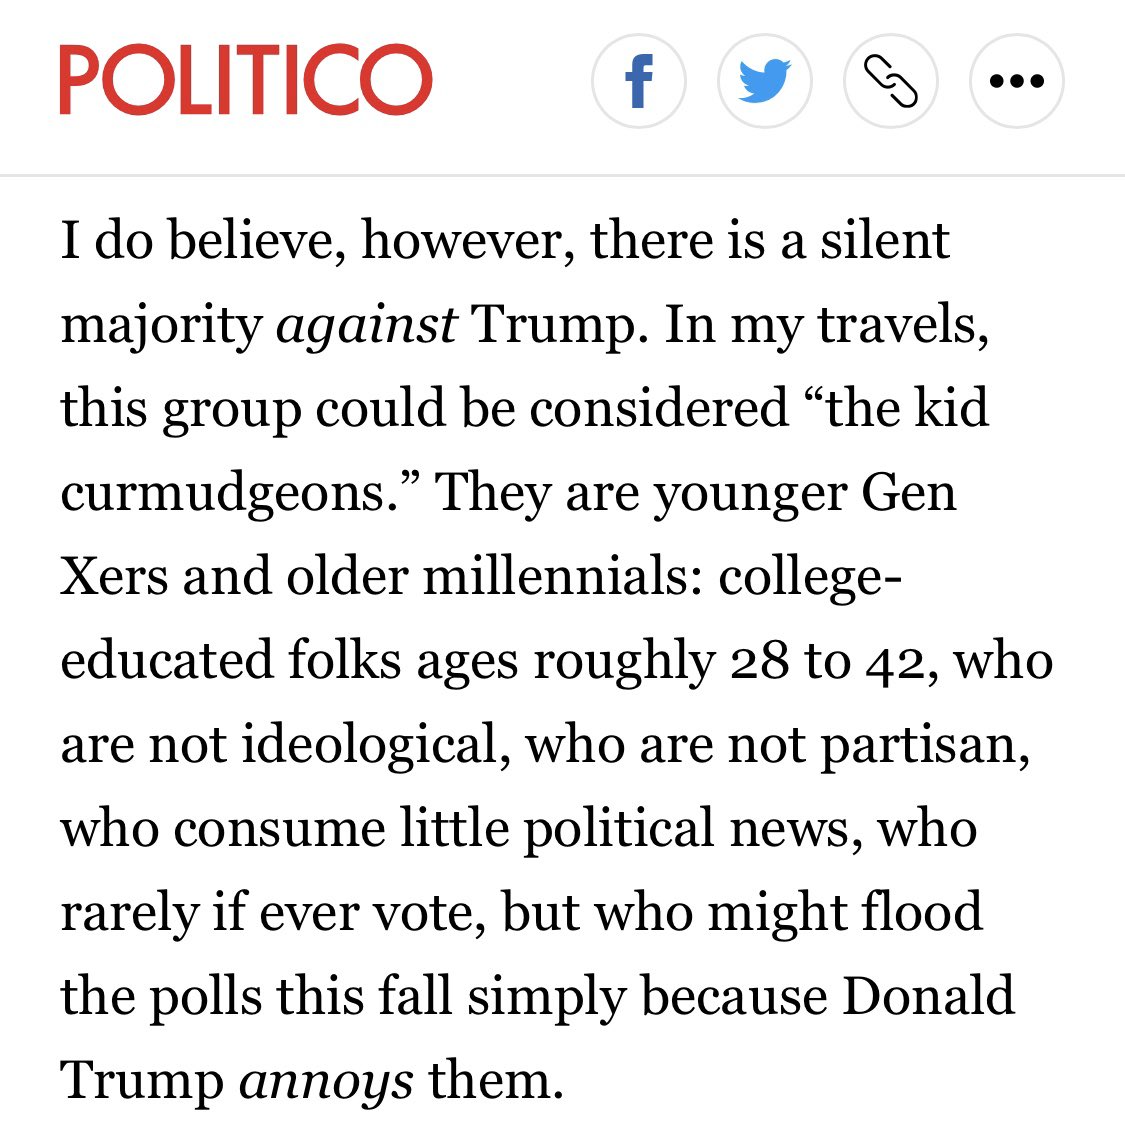 2. The “silent majority” in this election is not who you think it is. https://www.politico.com/news/magazine/2020/10/06/four-notes-election-reporter-notebook-426599